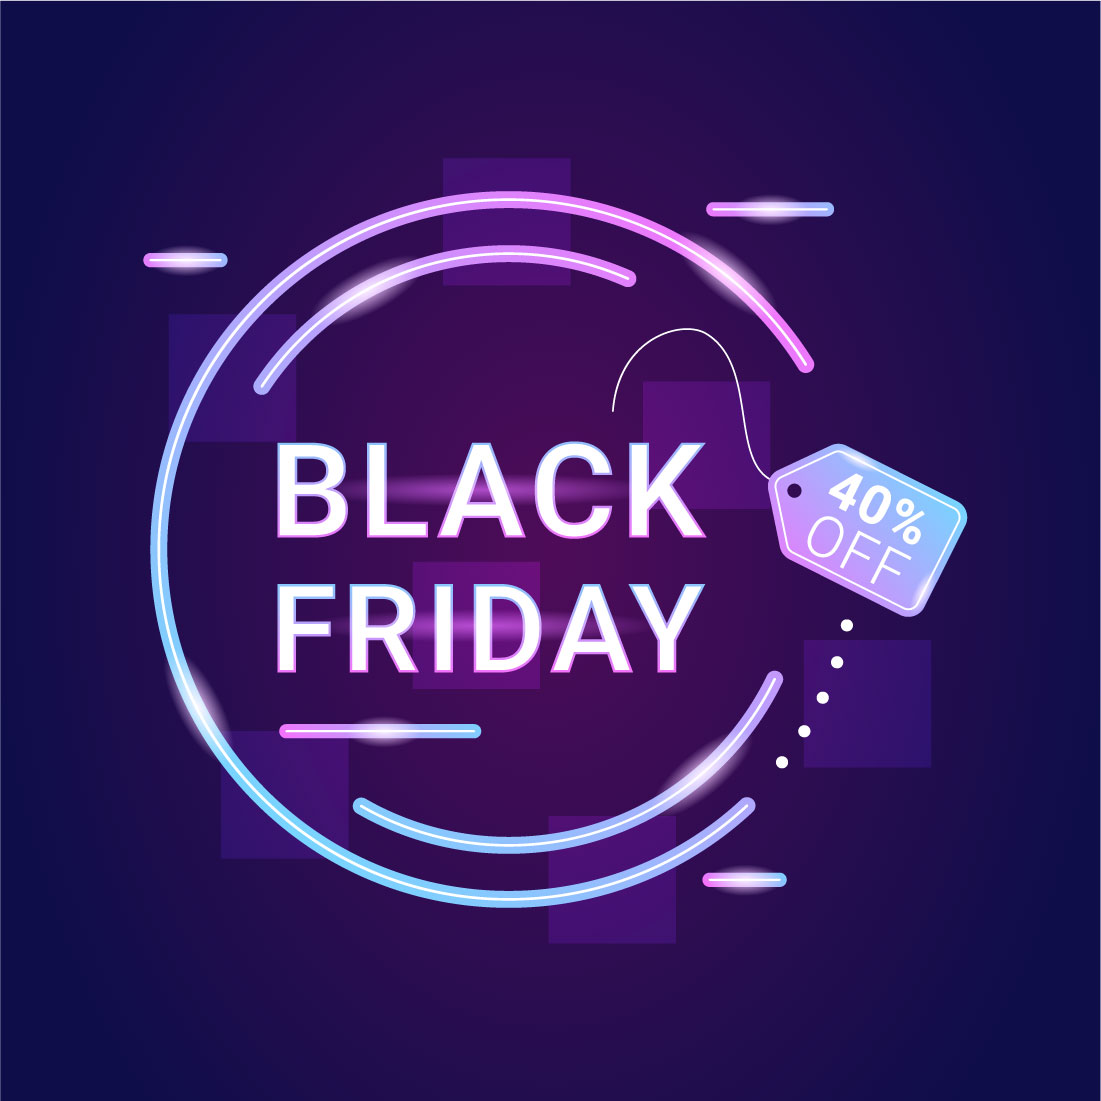 10 Black Friday Give Big Discount Illustration Preview Image.